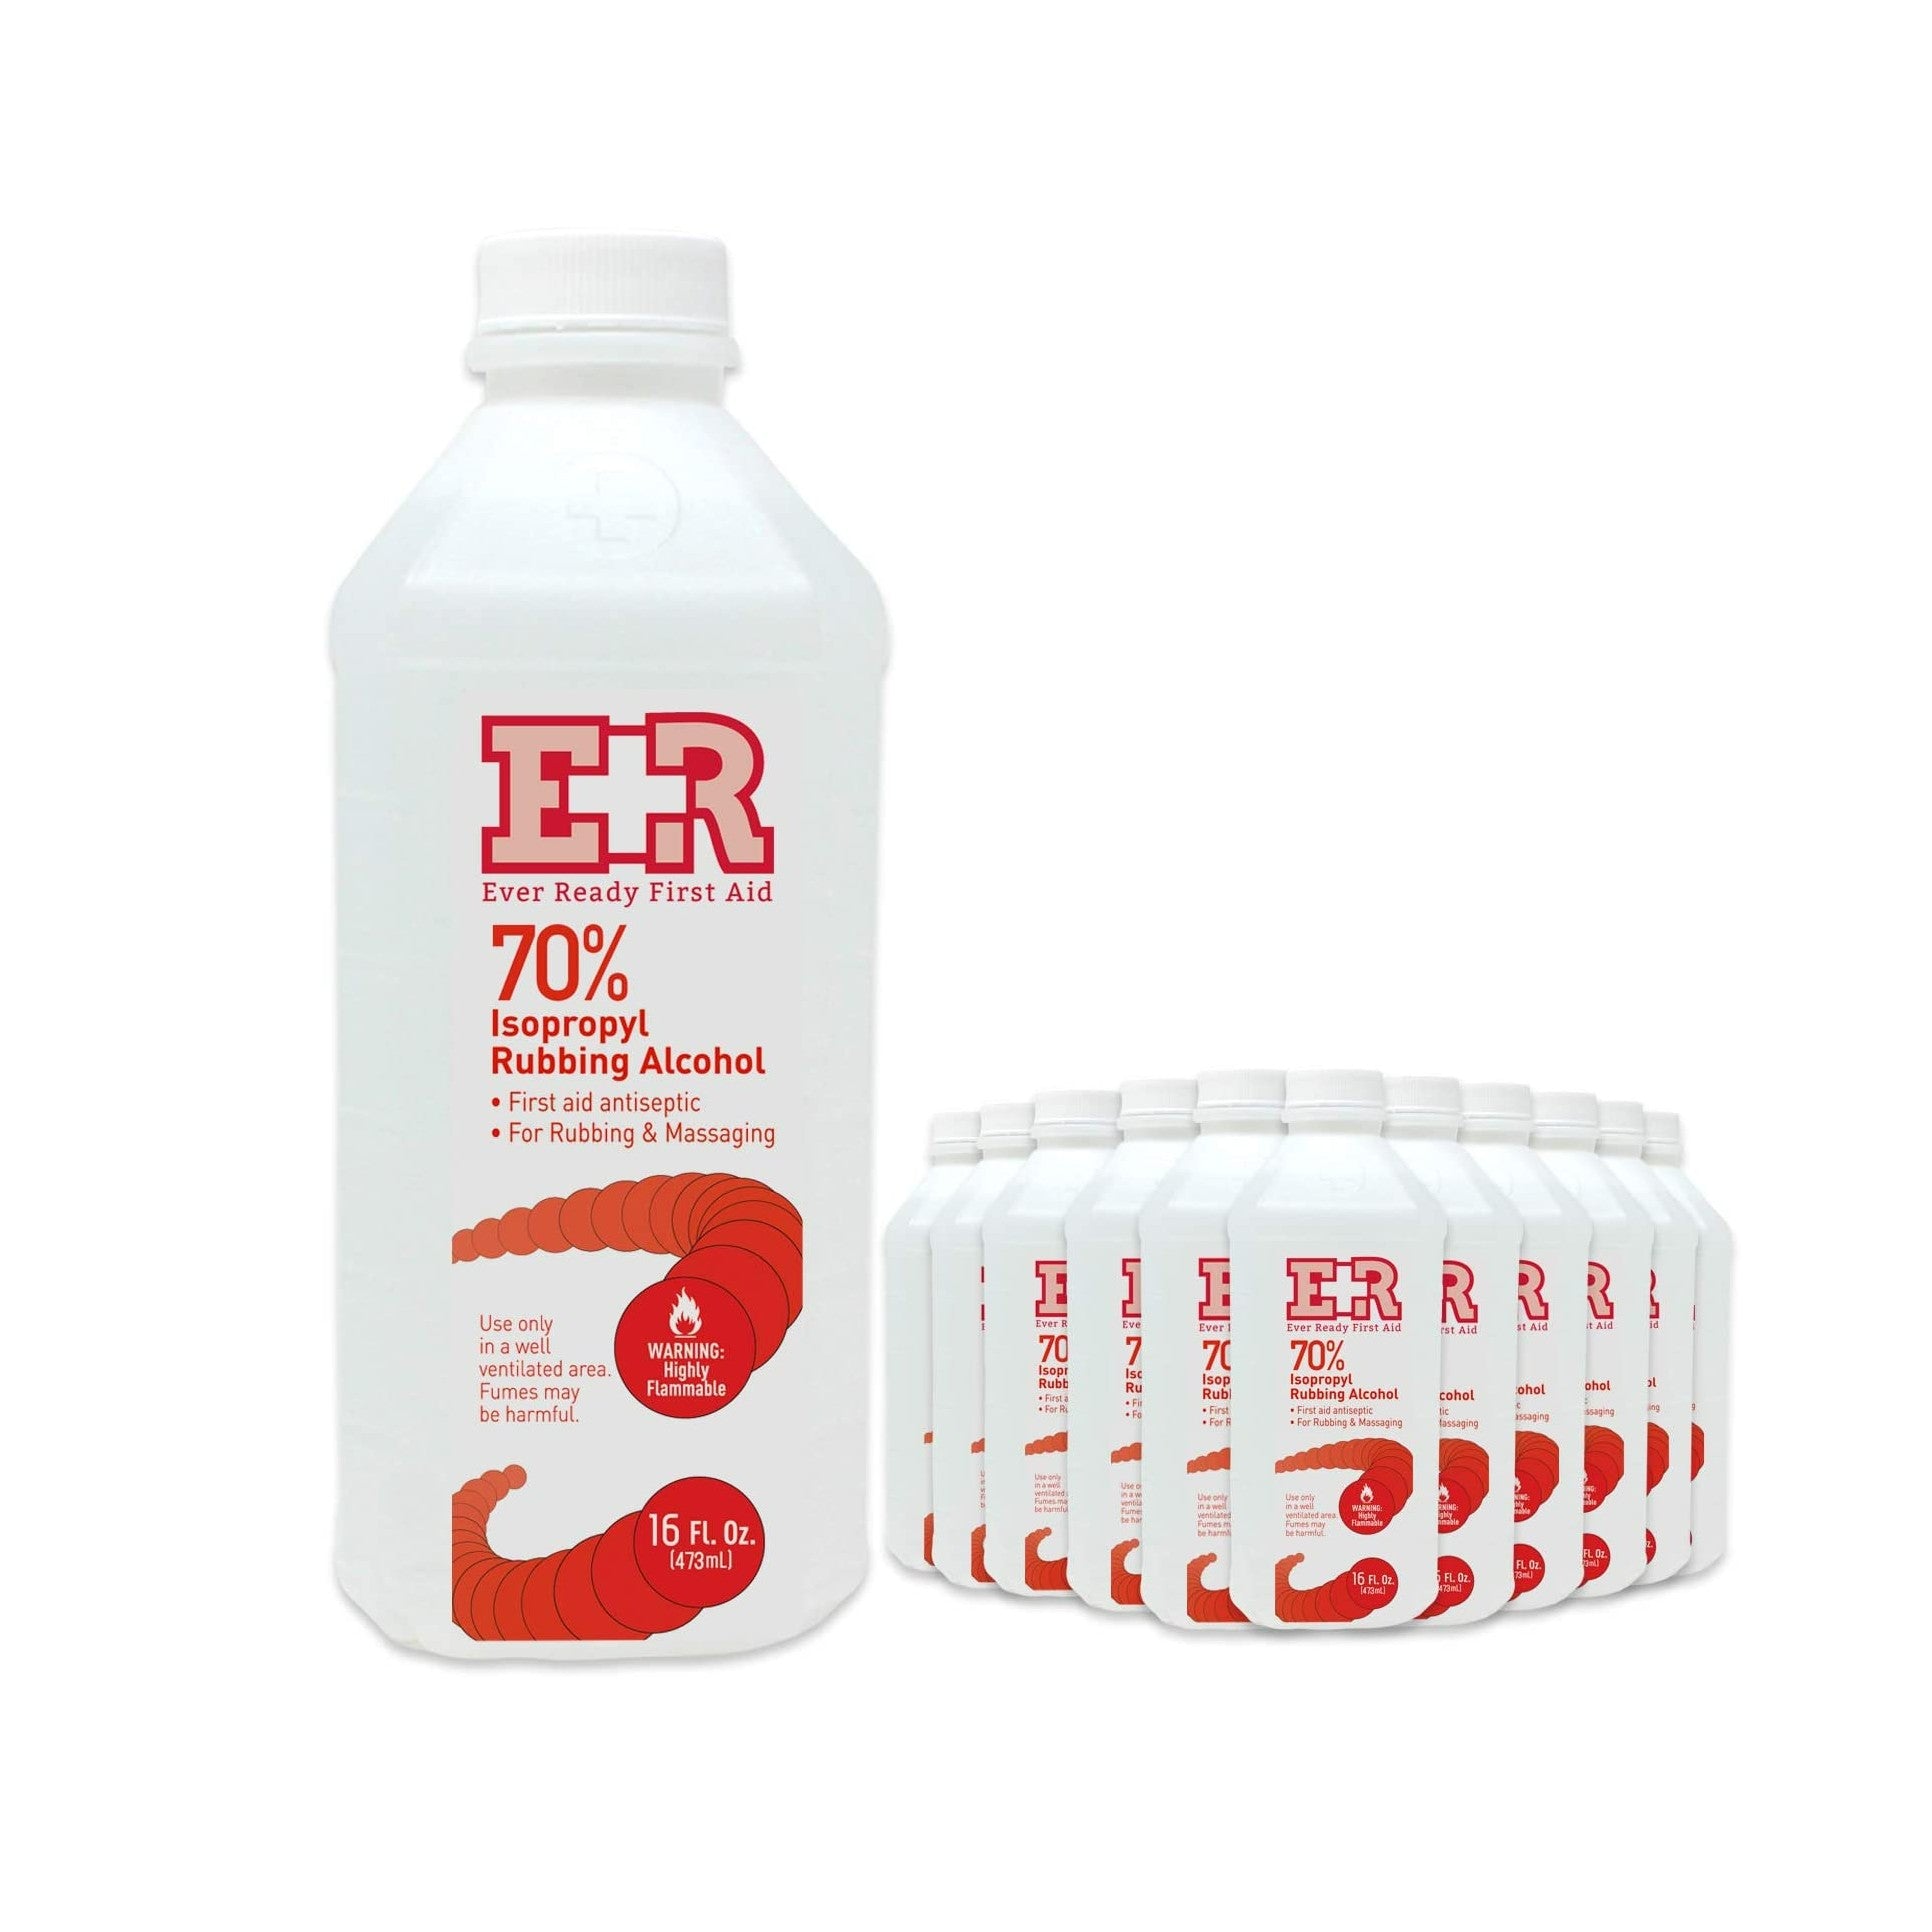 Ever Ready First Aid Isoprophyl Rubbing Alcohol, 70% 6 Oz - Bottle